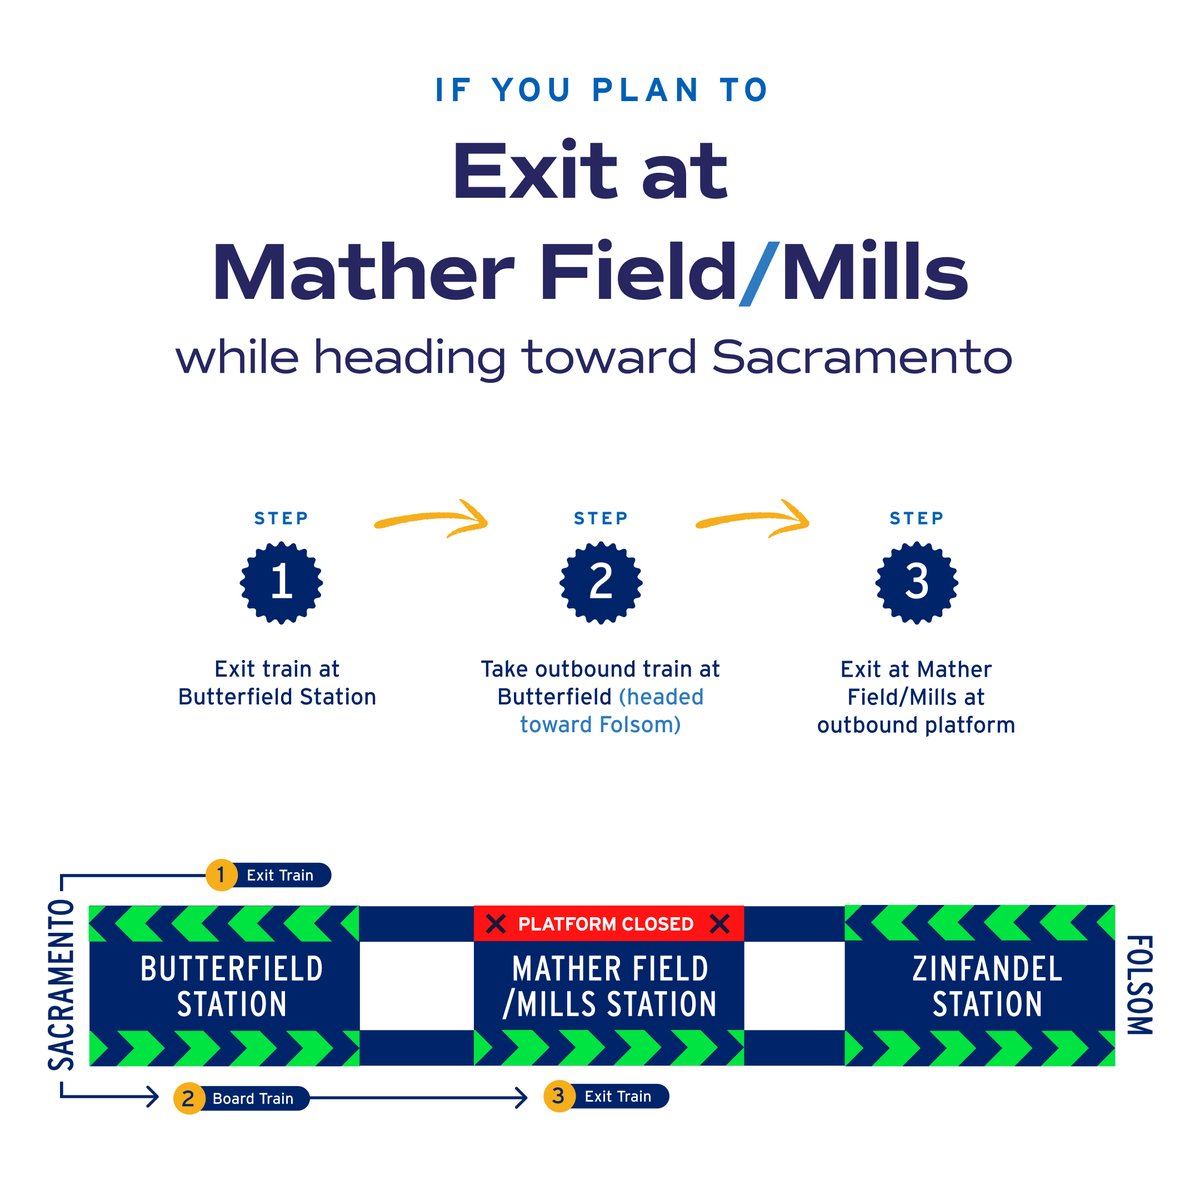 Rider Alert: The inbound platform (headed toward Sacramento) at Mather Field/Mills Station is closed for passengers boarding and deboarding through Friday, April 5. A shuttle bus will not be available. Visit sacrt.com/stationclosure for details.